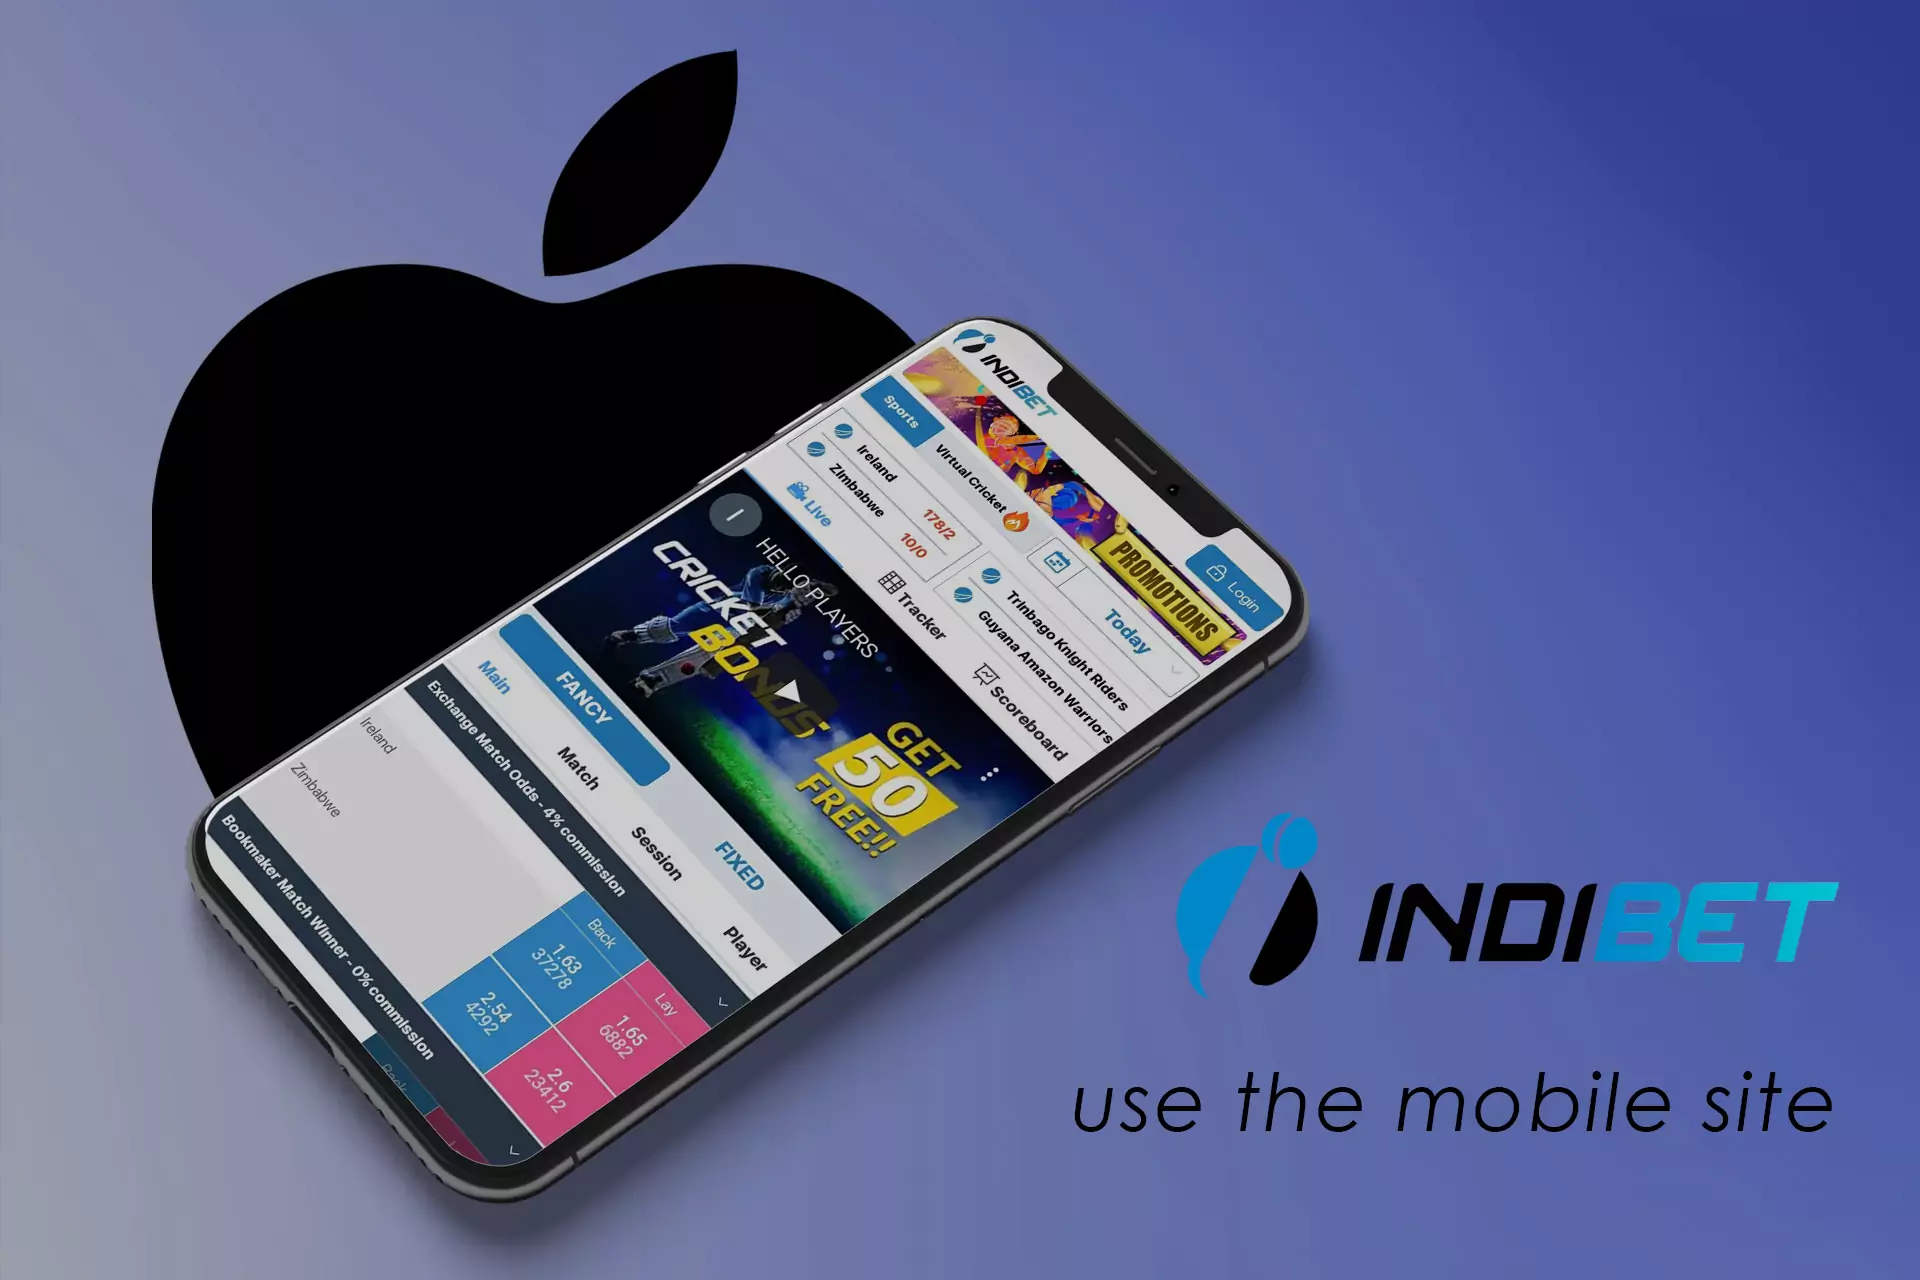 Since Indibet has not developed the app for iOS yet, you should use the browser version.